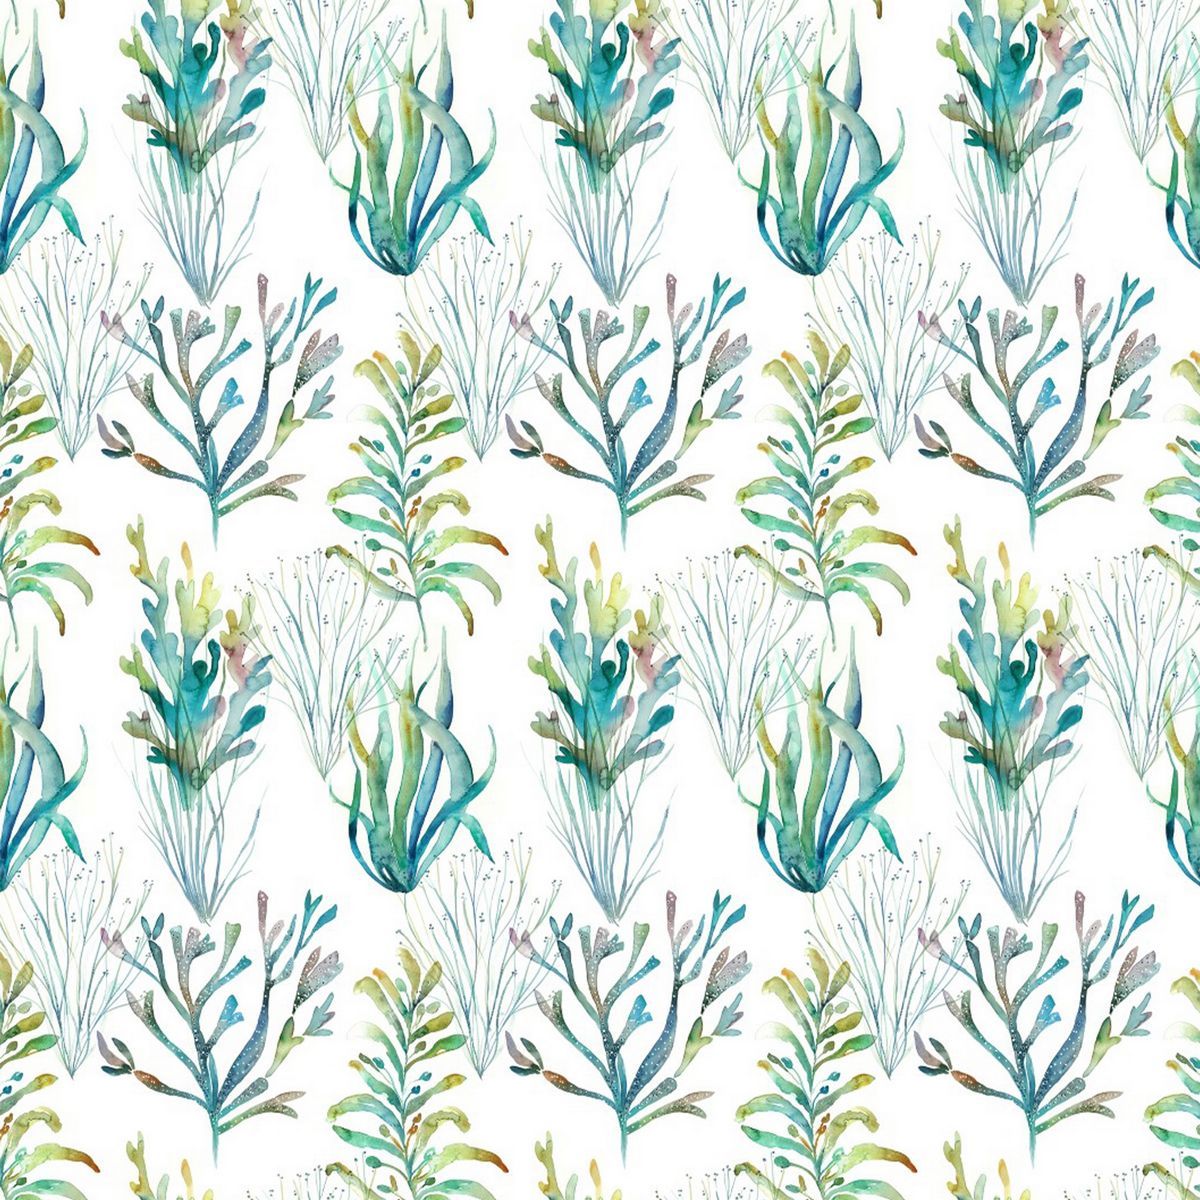 Coral Reef Kelpie Fabric by Voyage Maison